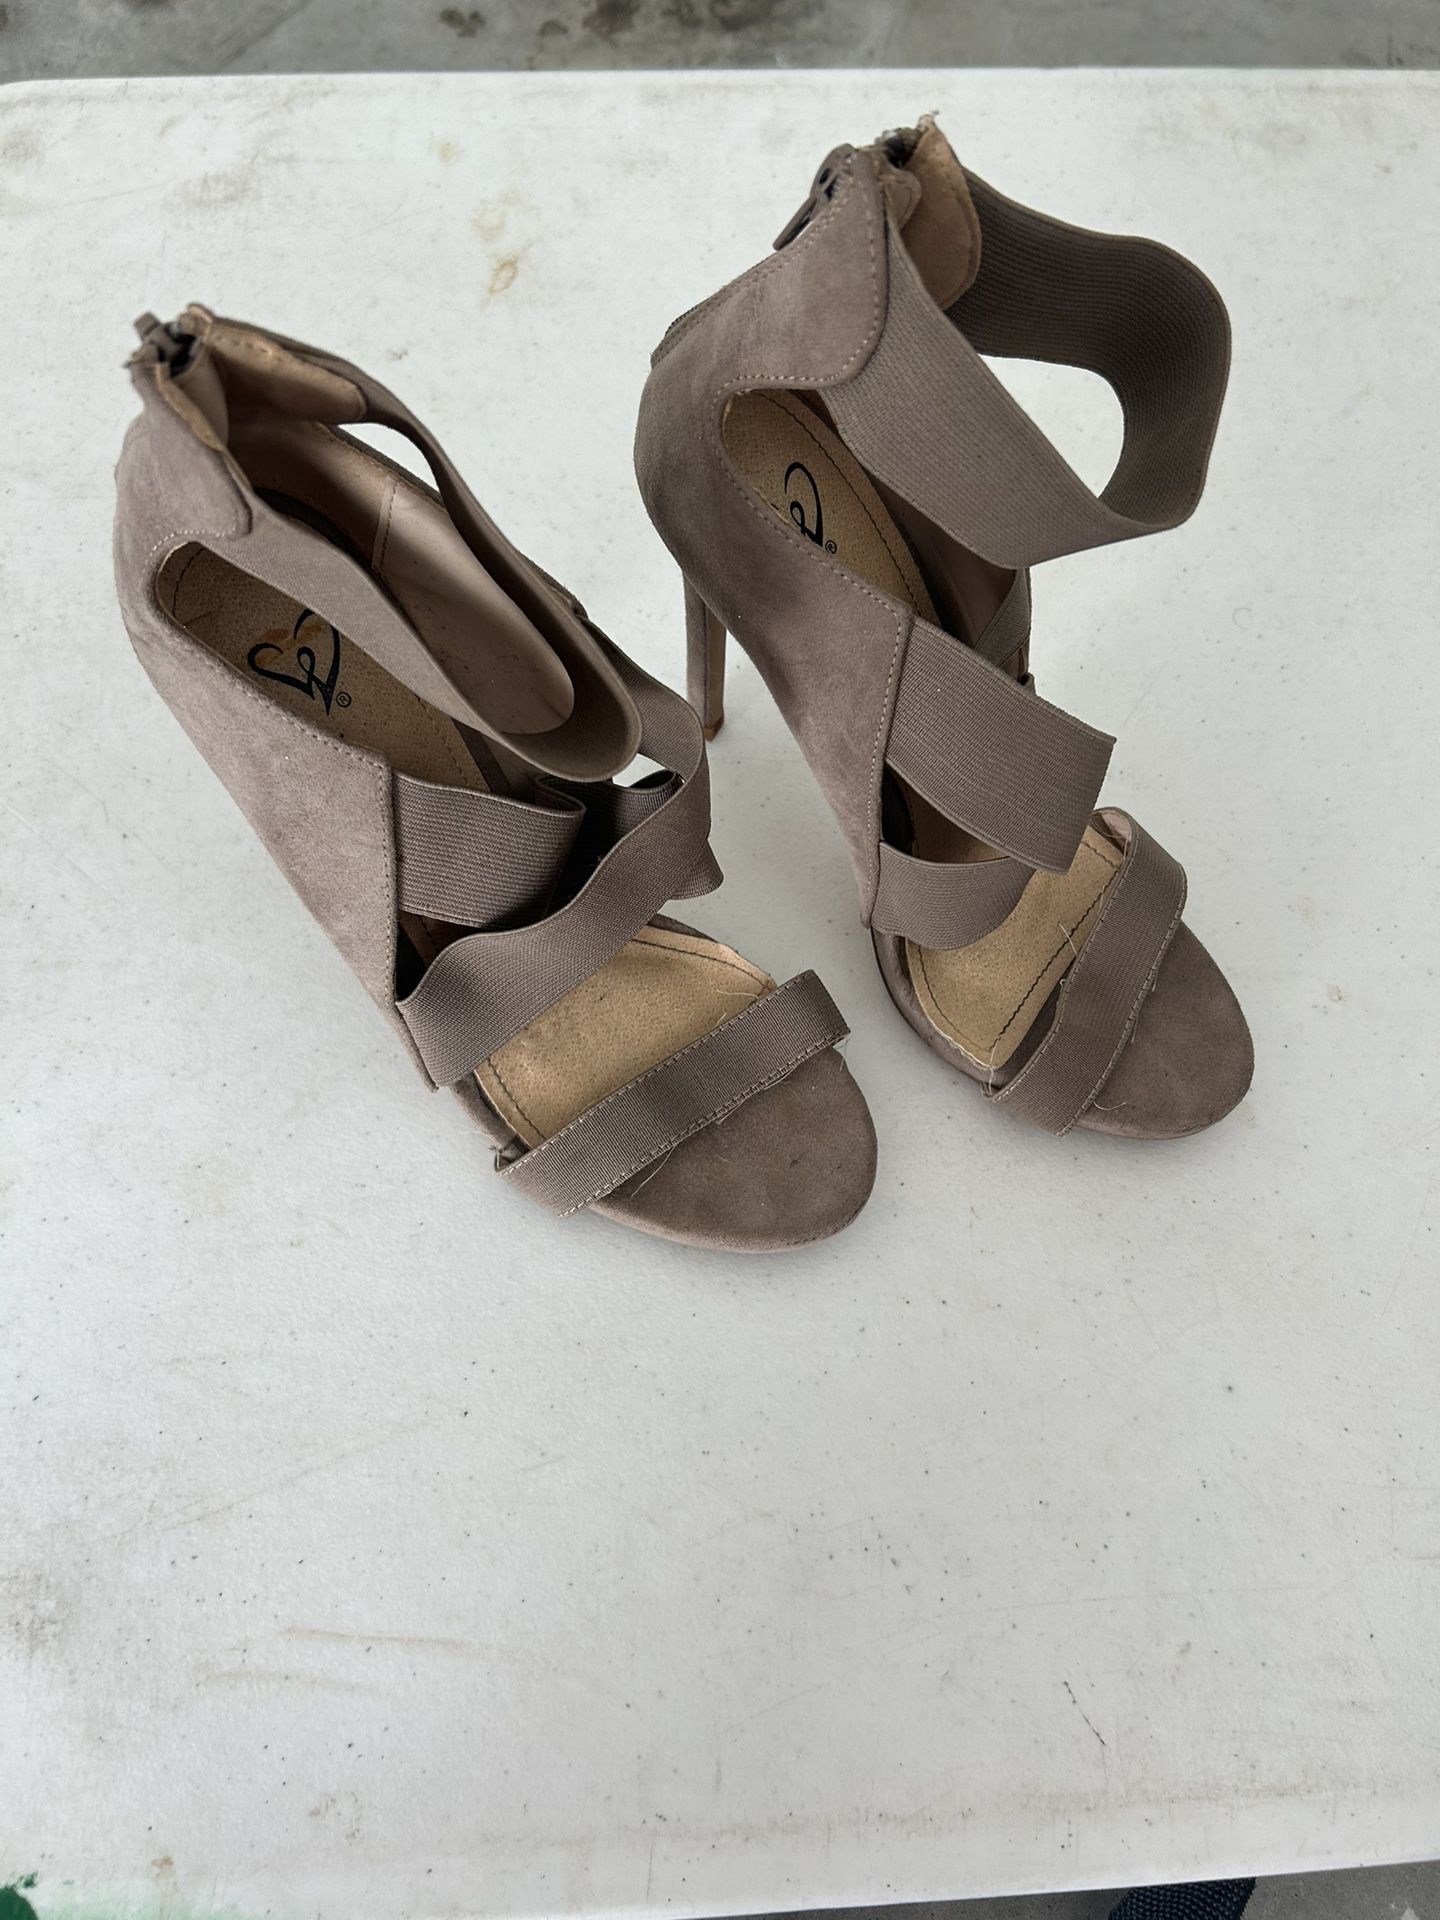 Taupe High Heels Size 7